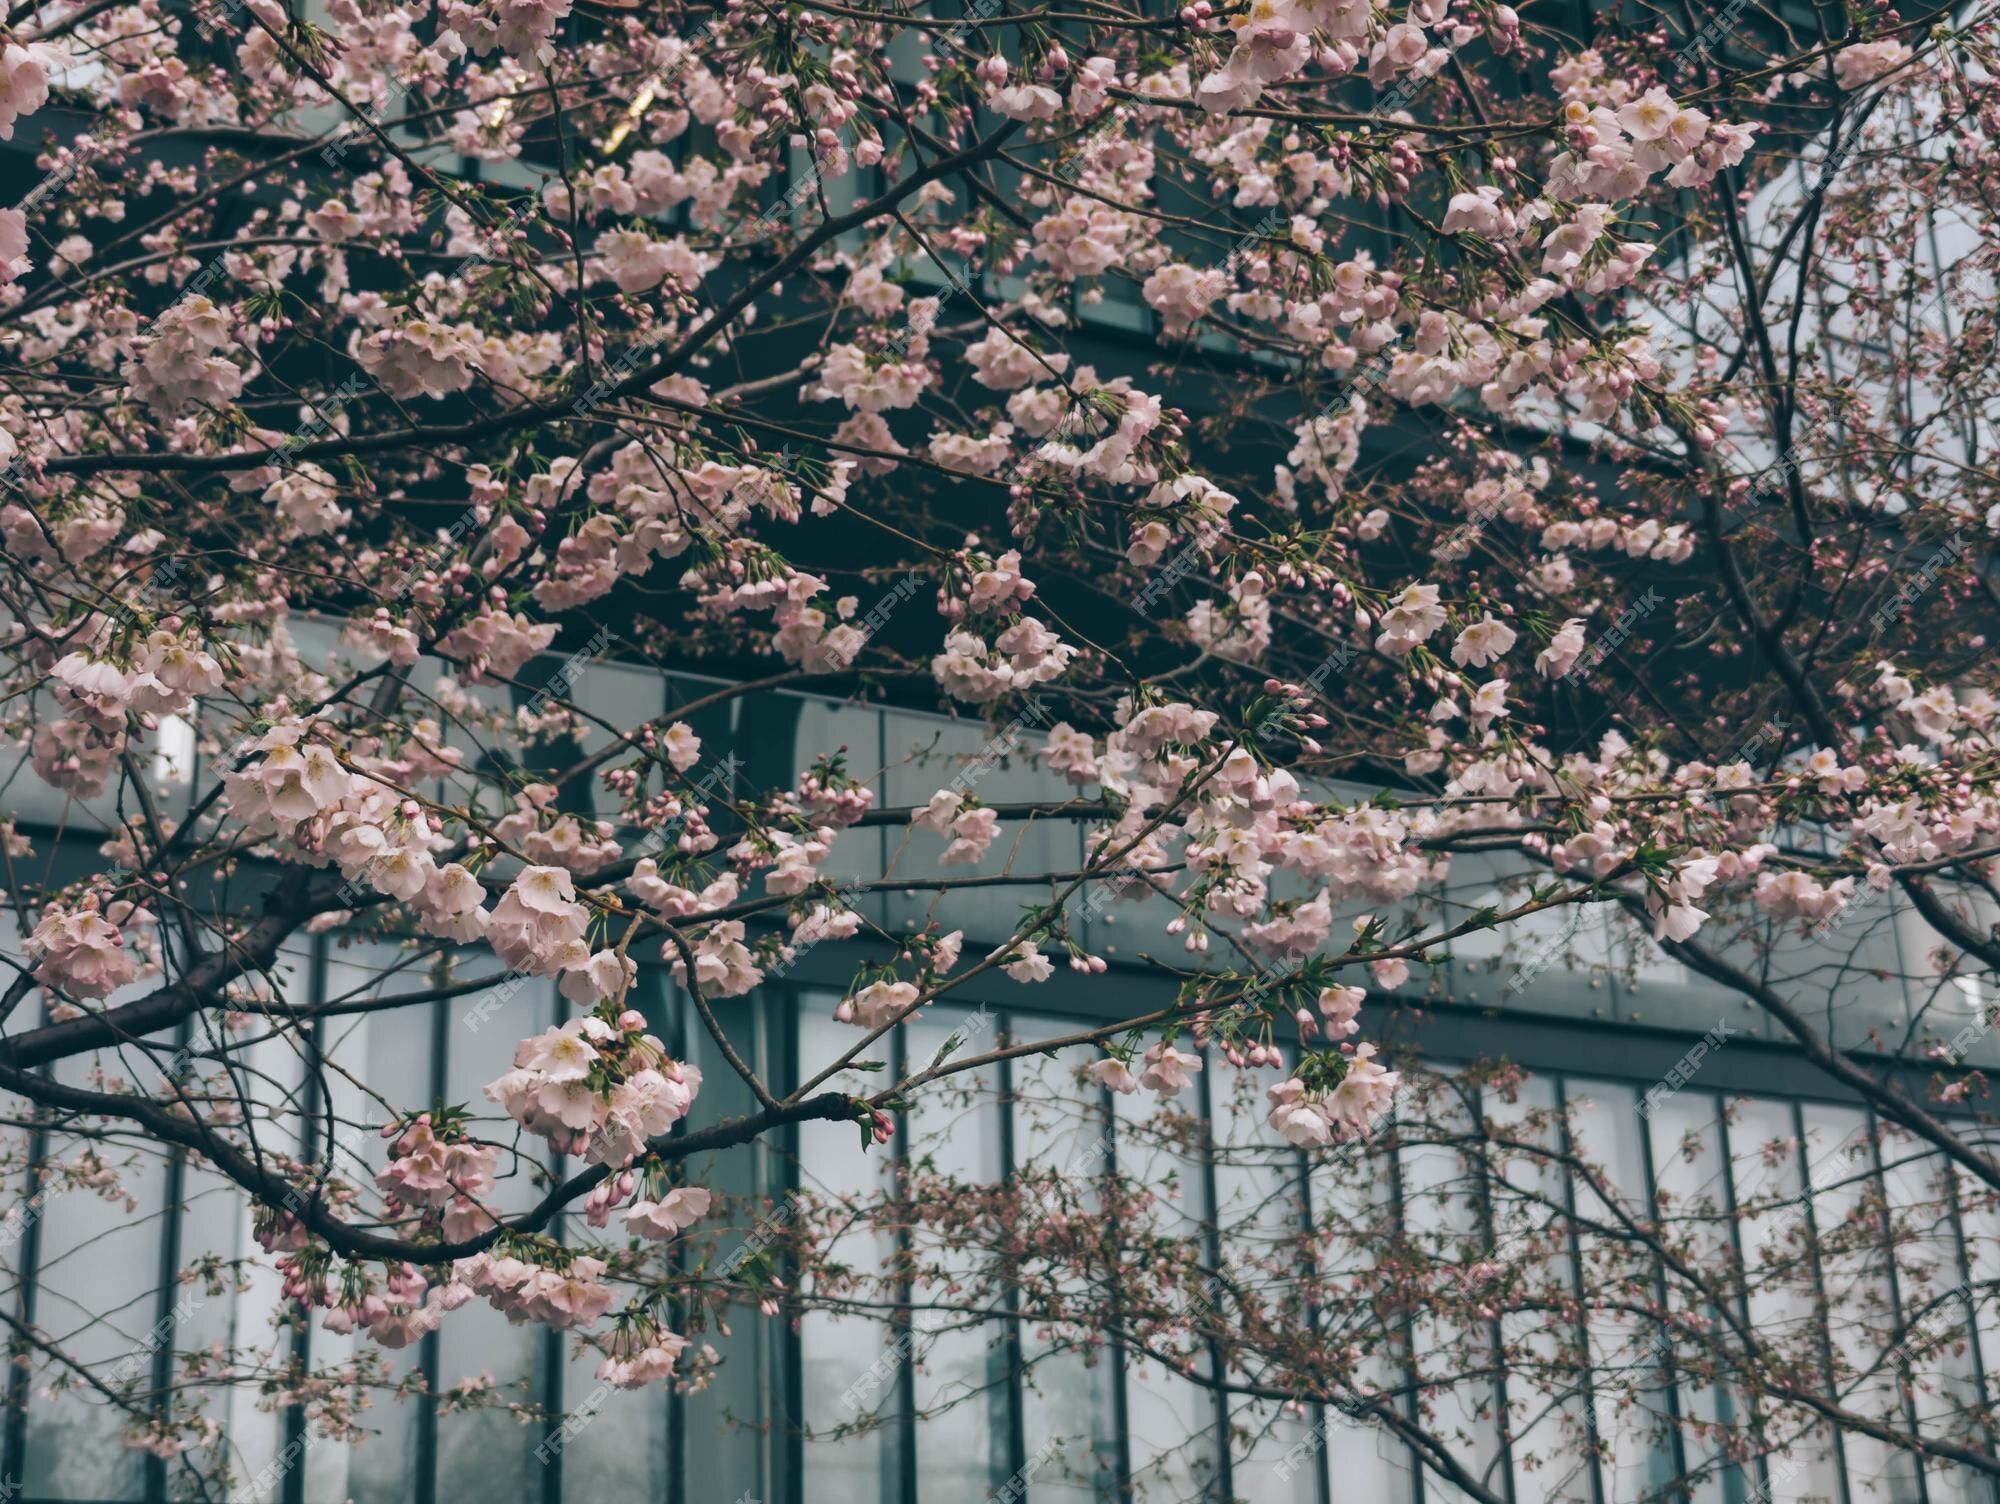 Premium Photo. A building with a glass wall and a tree with pink flowers